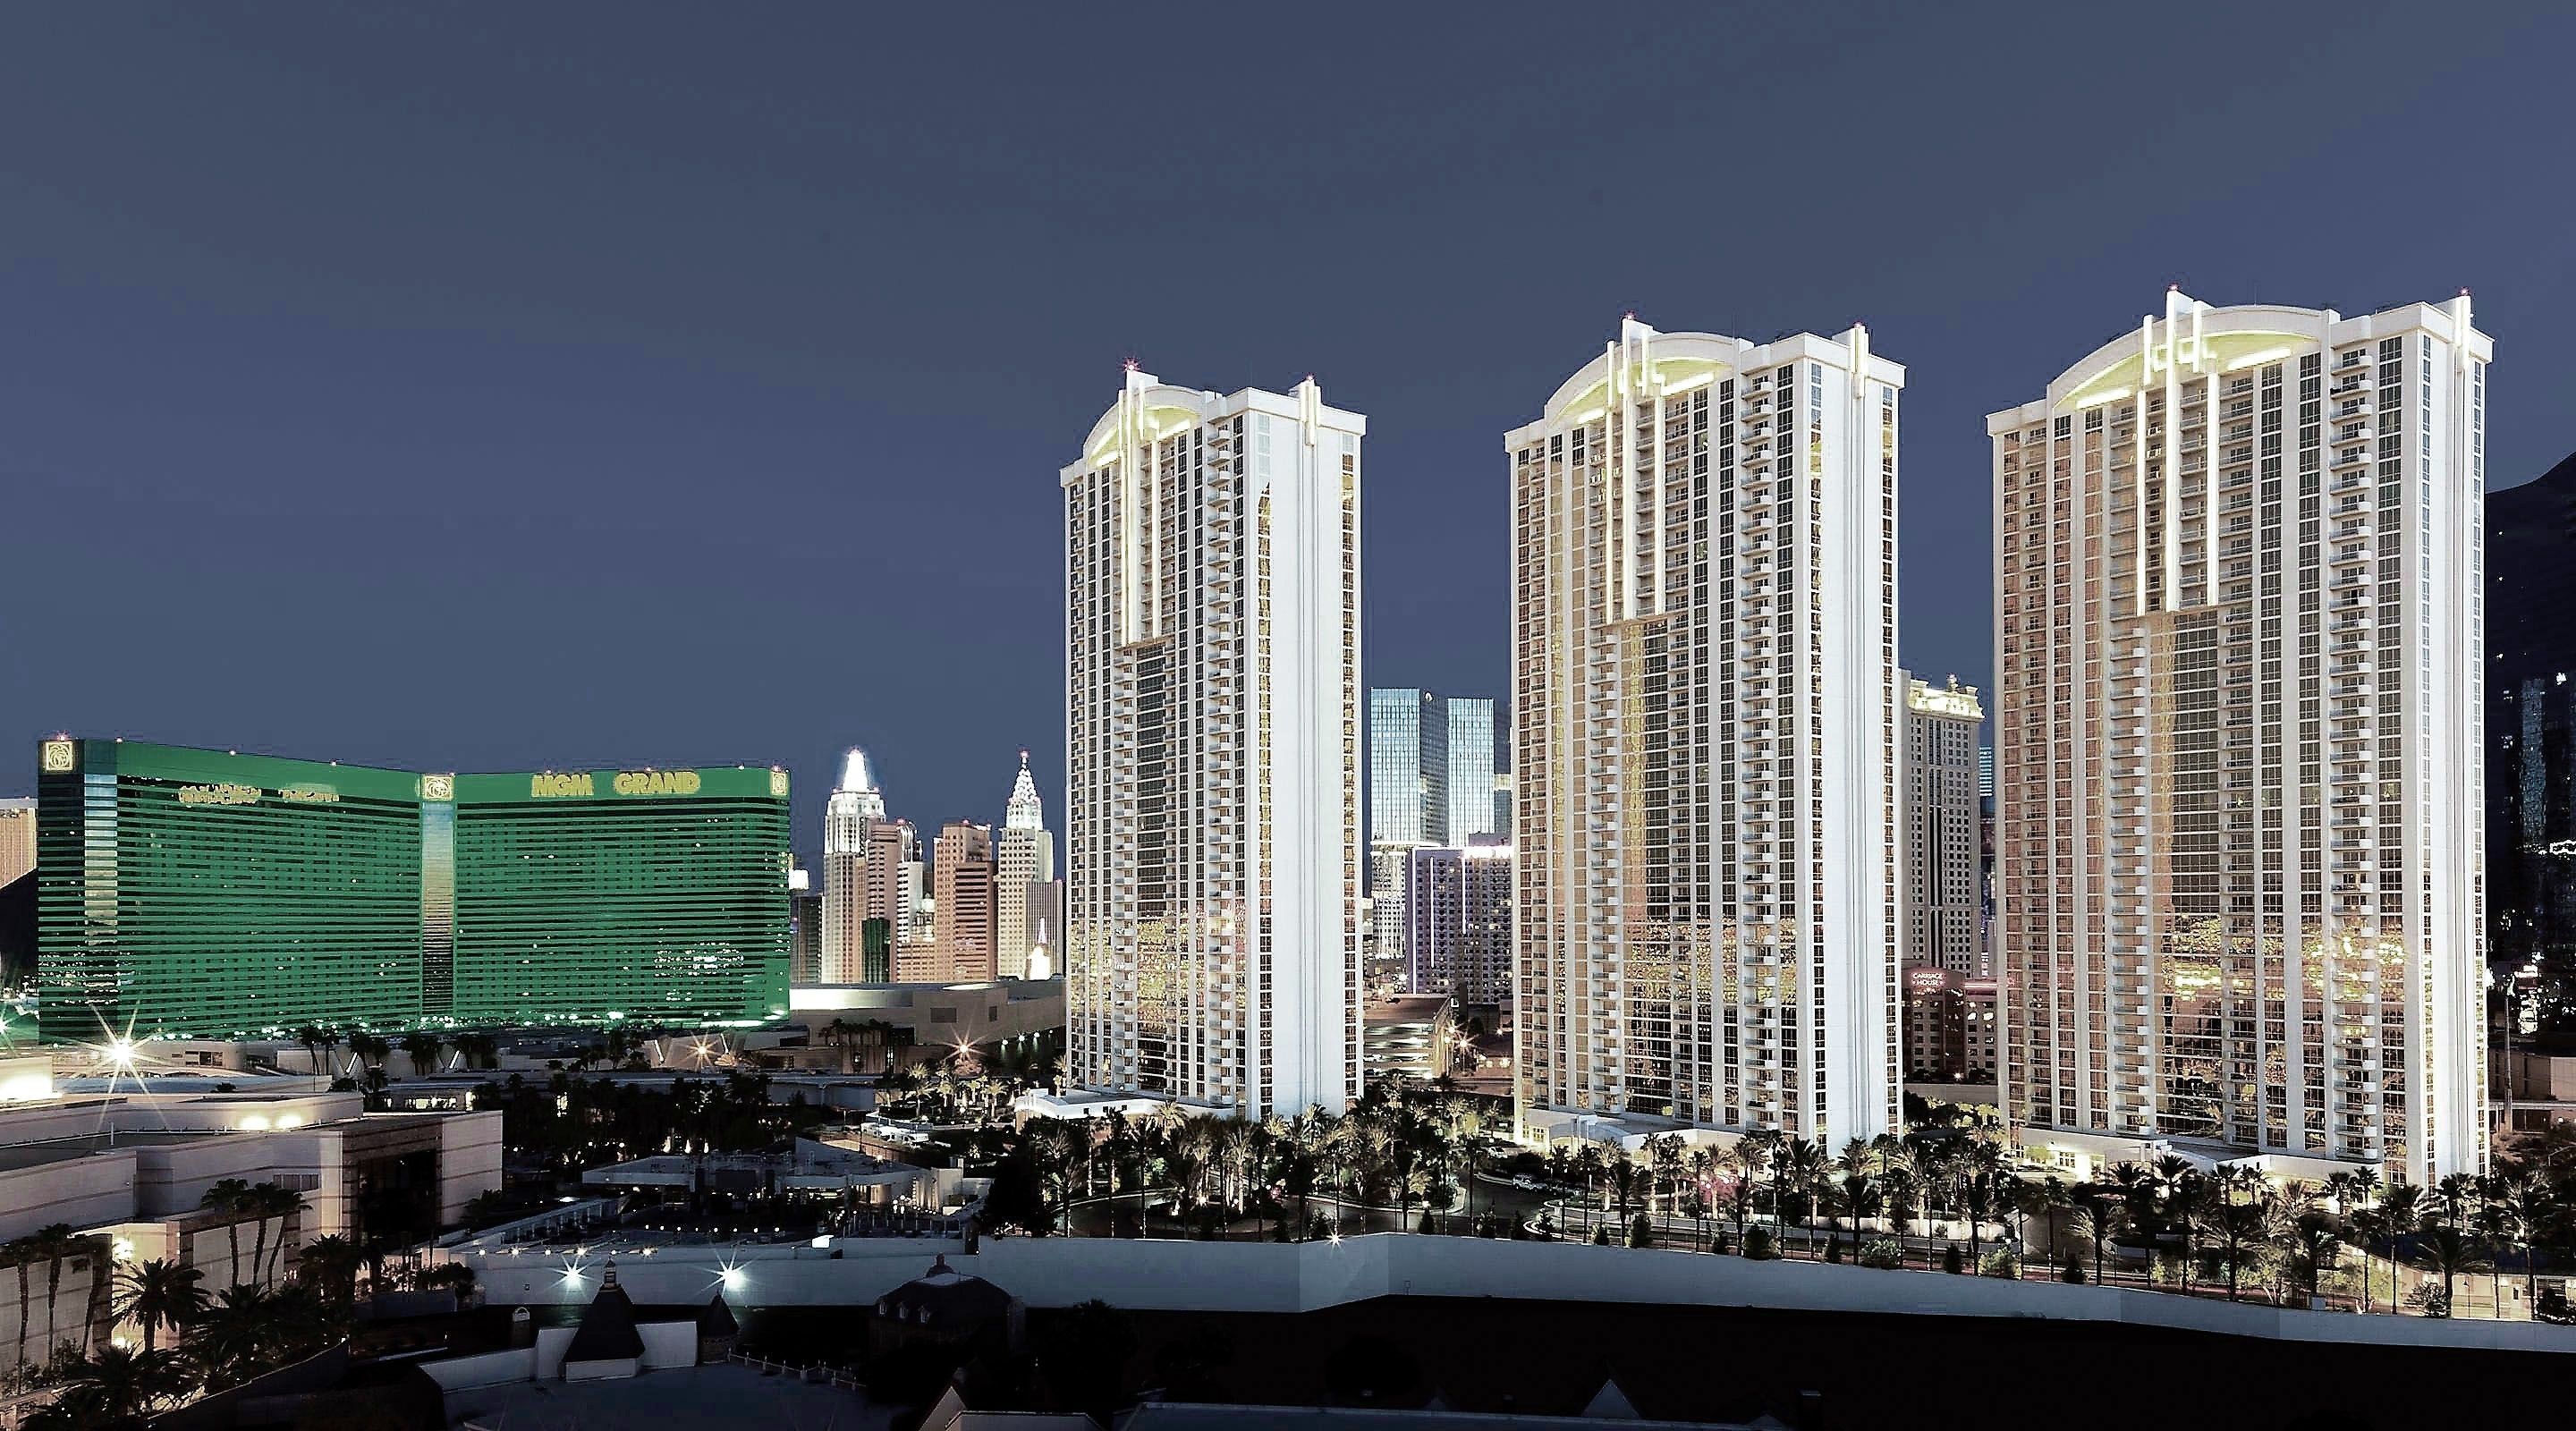 The Signature at MGM Grand by Christopher Realty